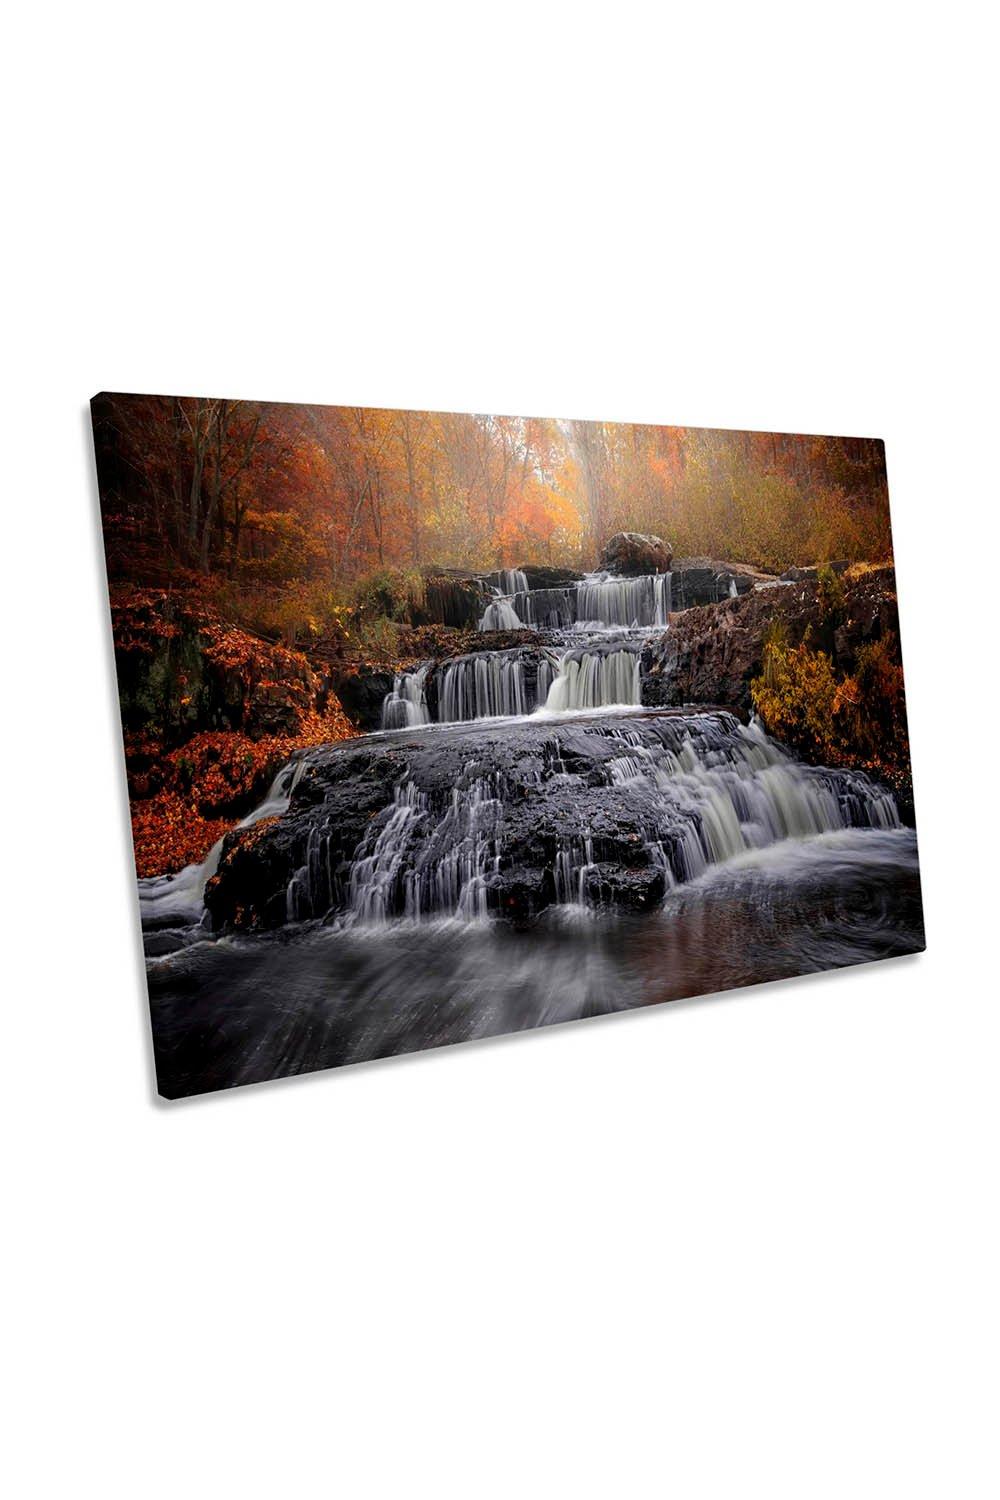 Waterfall Forest Landscape River Canvas Wall Art Picture Print